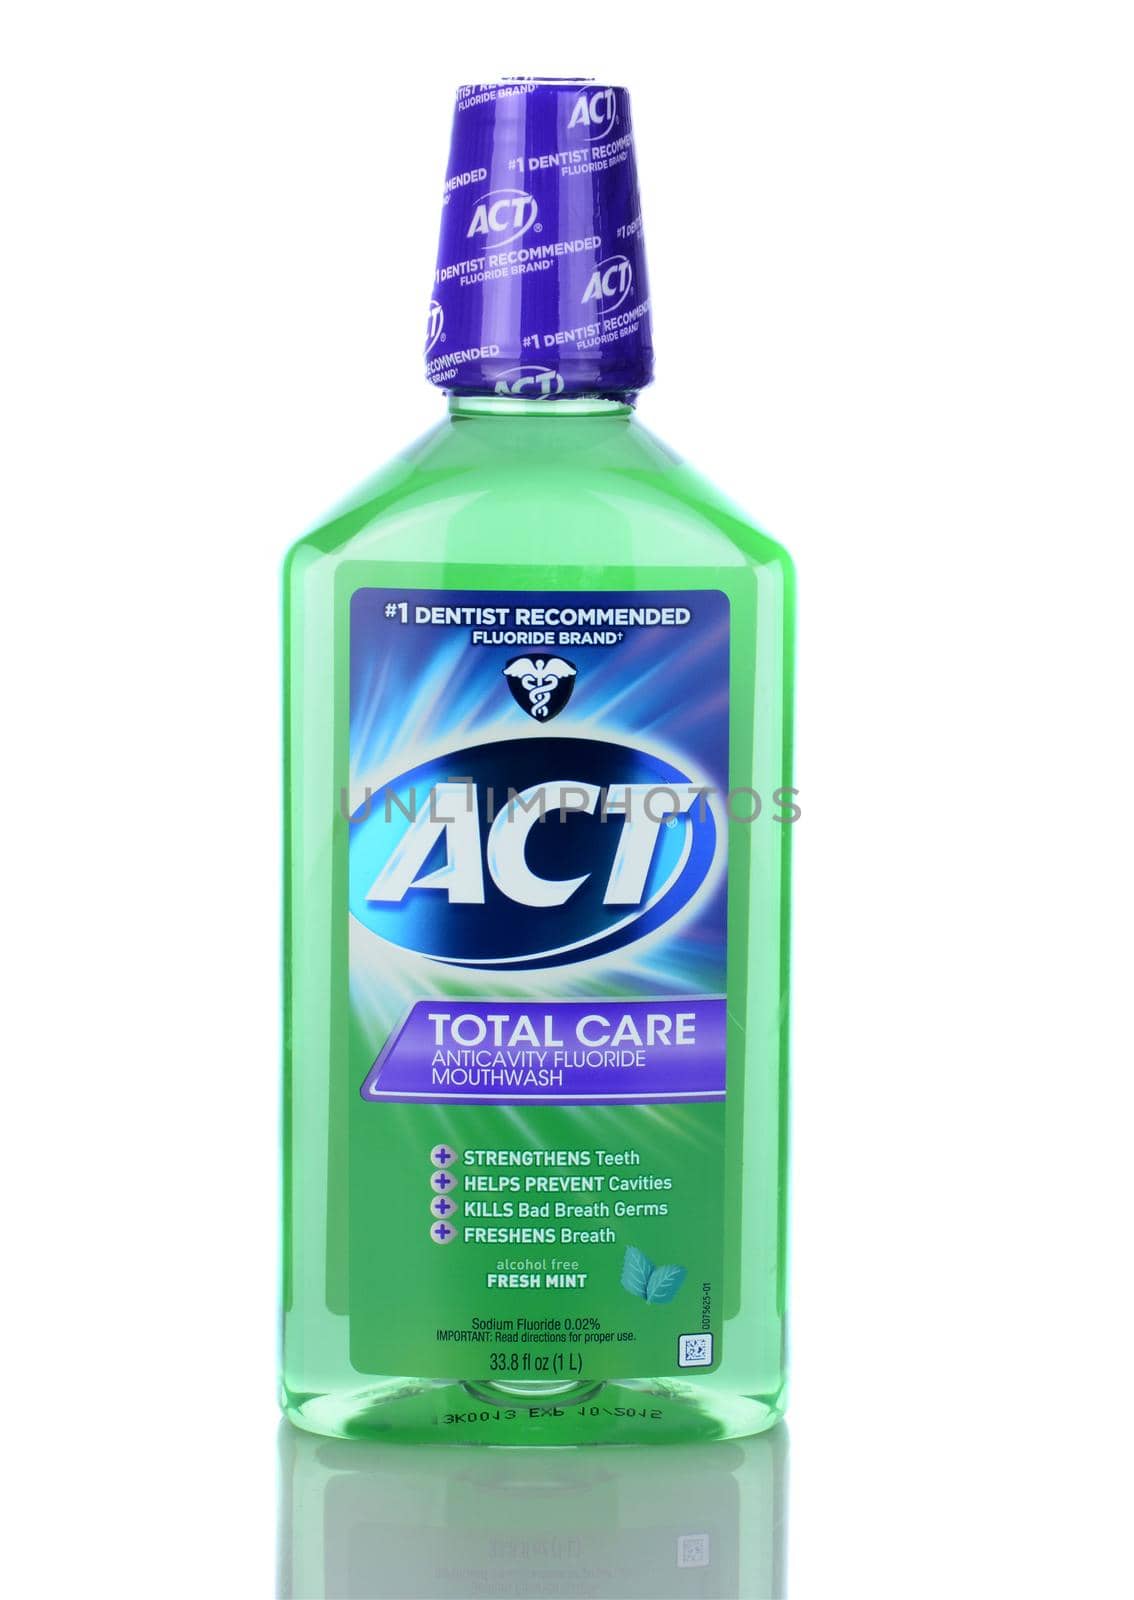 IRVINE, CA - January 05, 2014: A bottle of ACT Total Care Anticavity Mouthwash. A 1 liter bottle of the oral hygiene mouthwash with fluoride.